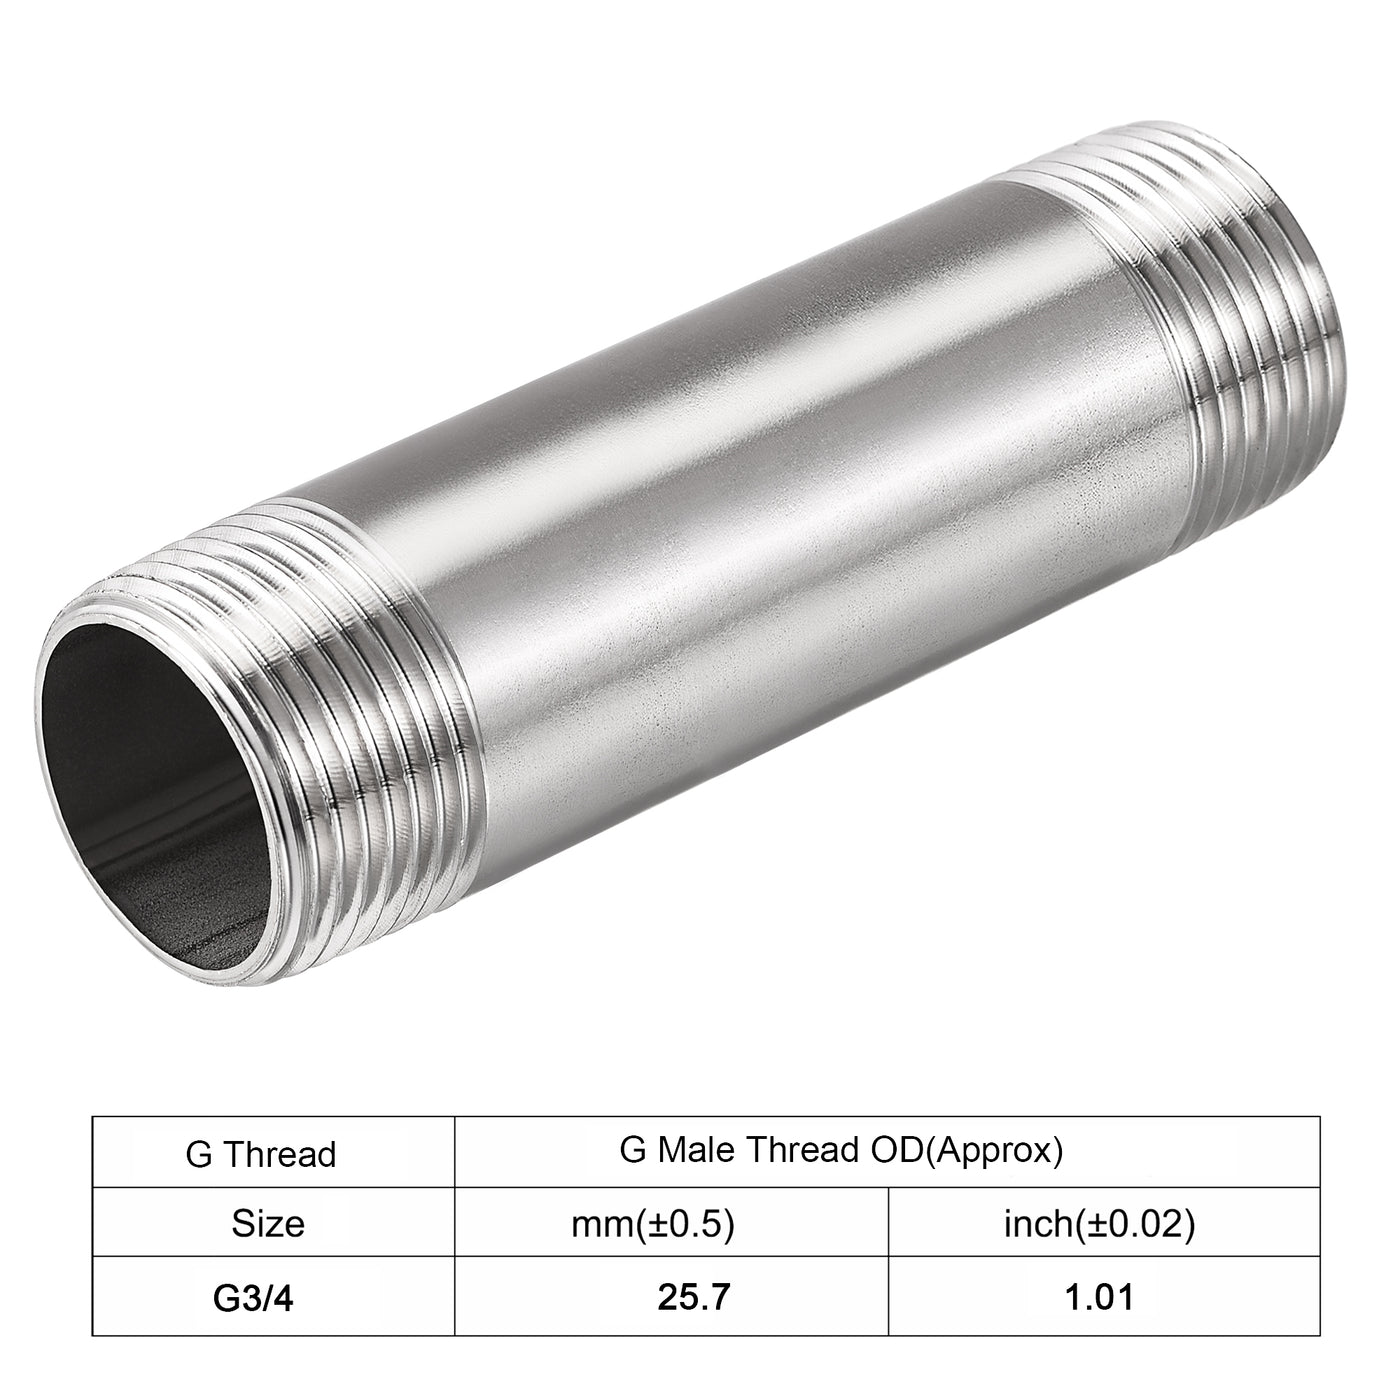 uxcell Uxcell Stainless Steel Pipe Fitting Male Coupler for Extending Pipes